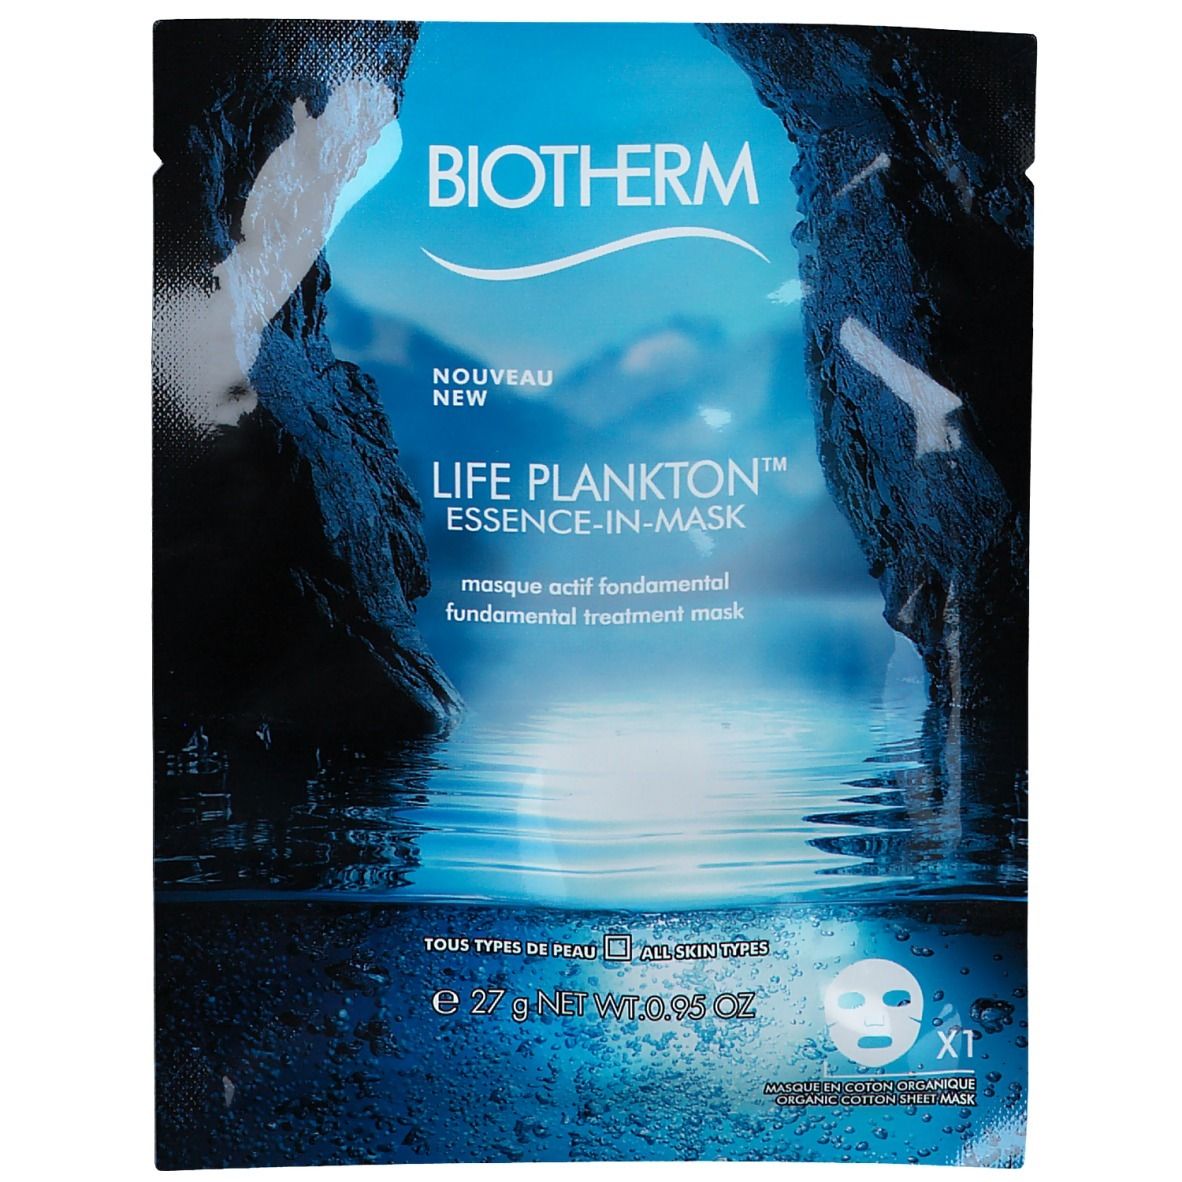 Biotherm LIFE PLANKTON™ ESSENCE-IN-MASK